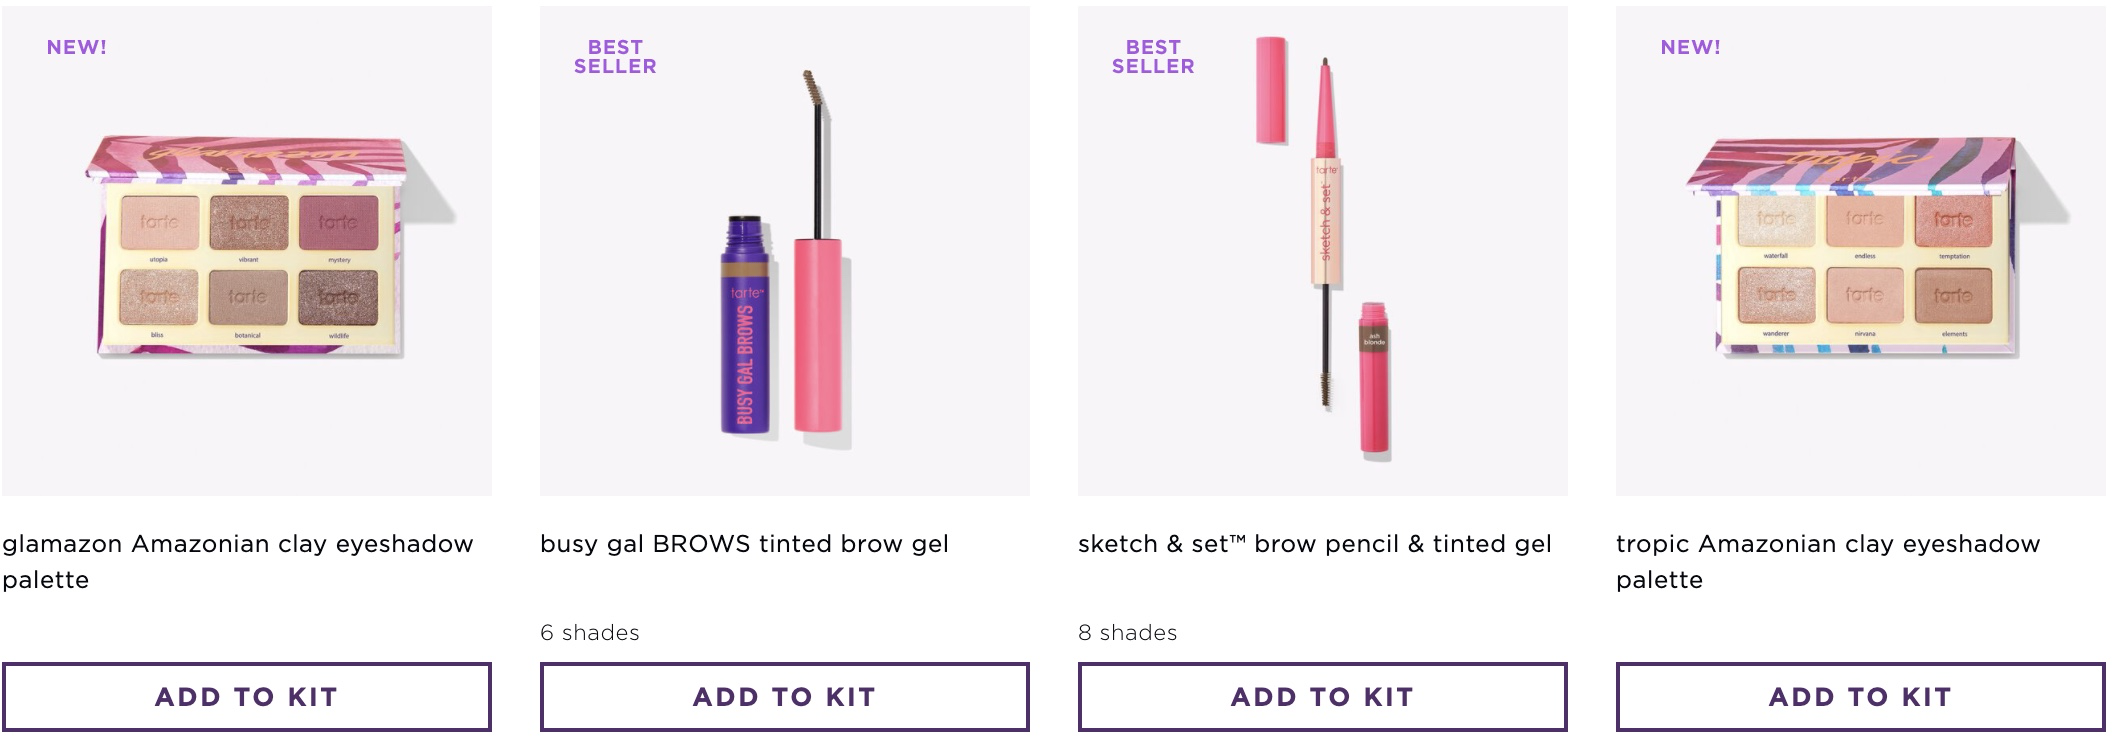 Tarte Custom Kit Is Here With 7 Full Size Items! Hello Subscription